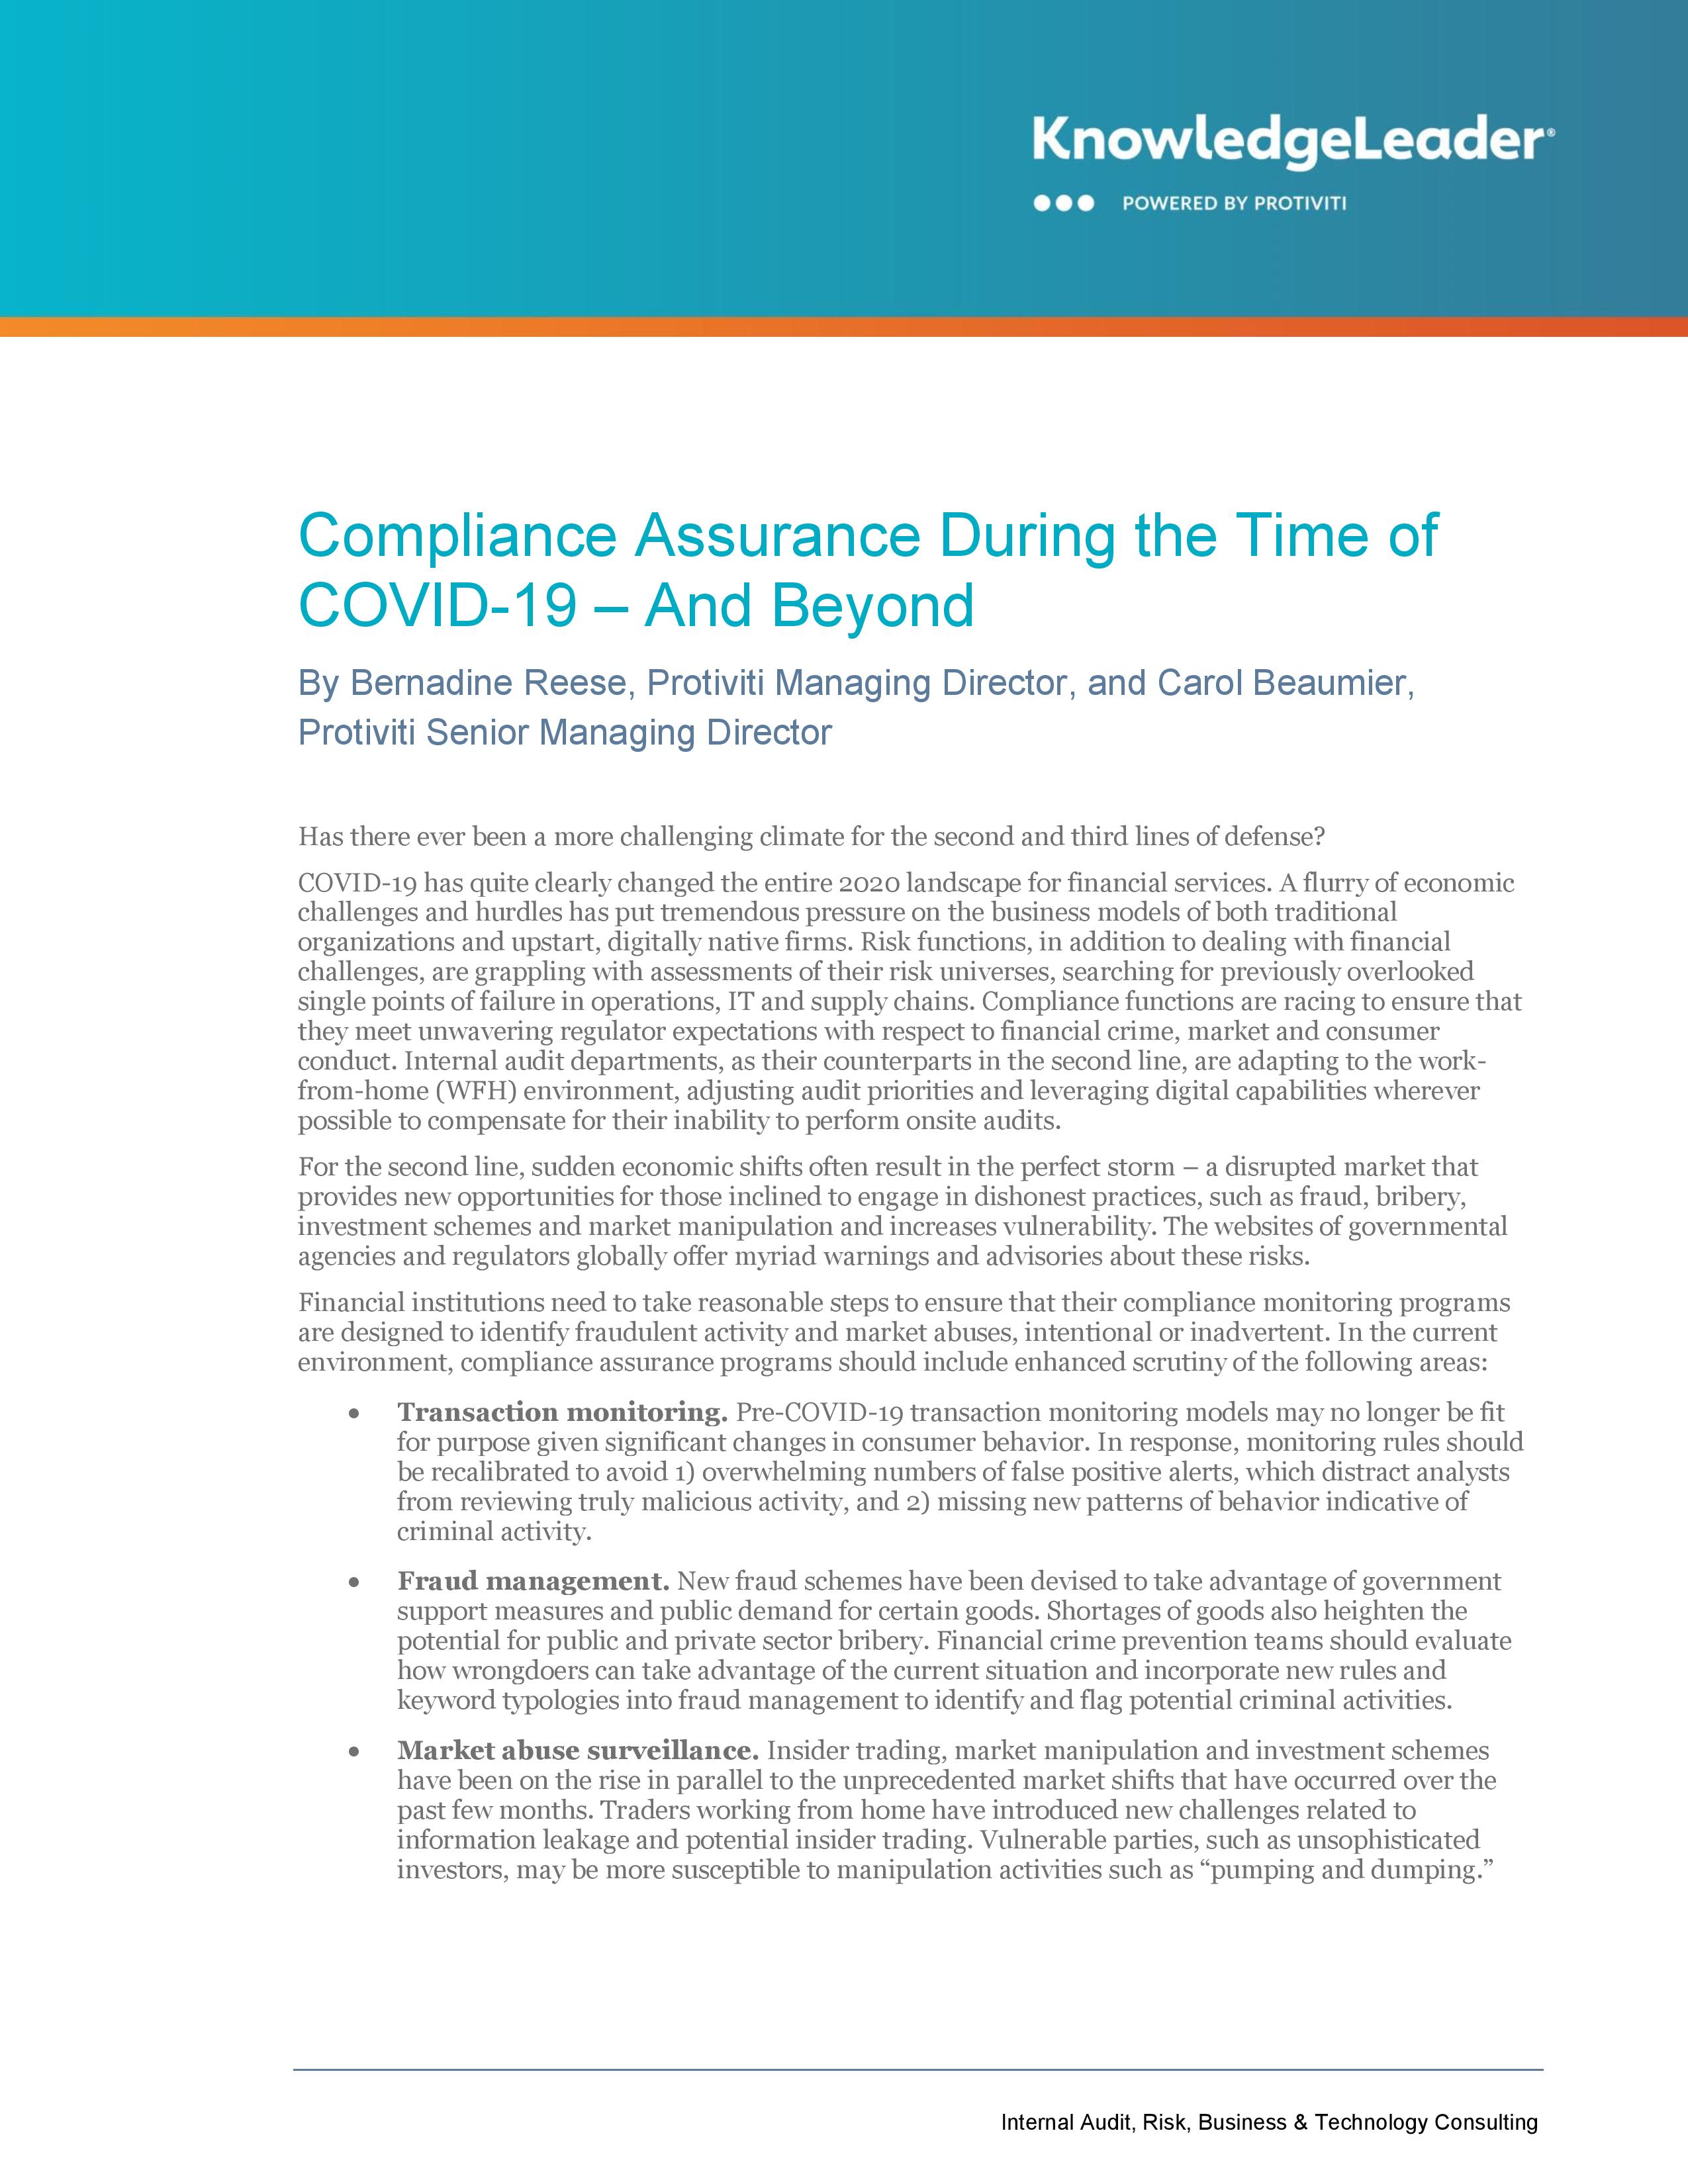 screenshot of the first page of Compliance Assurance During the Time of COVID-19 – And Beyond